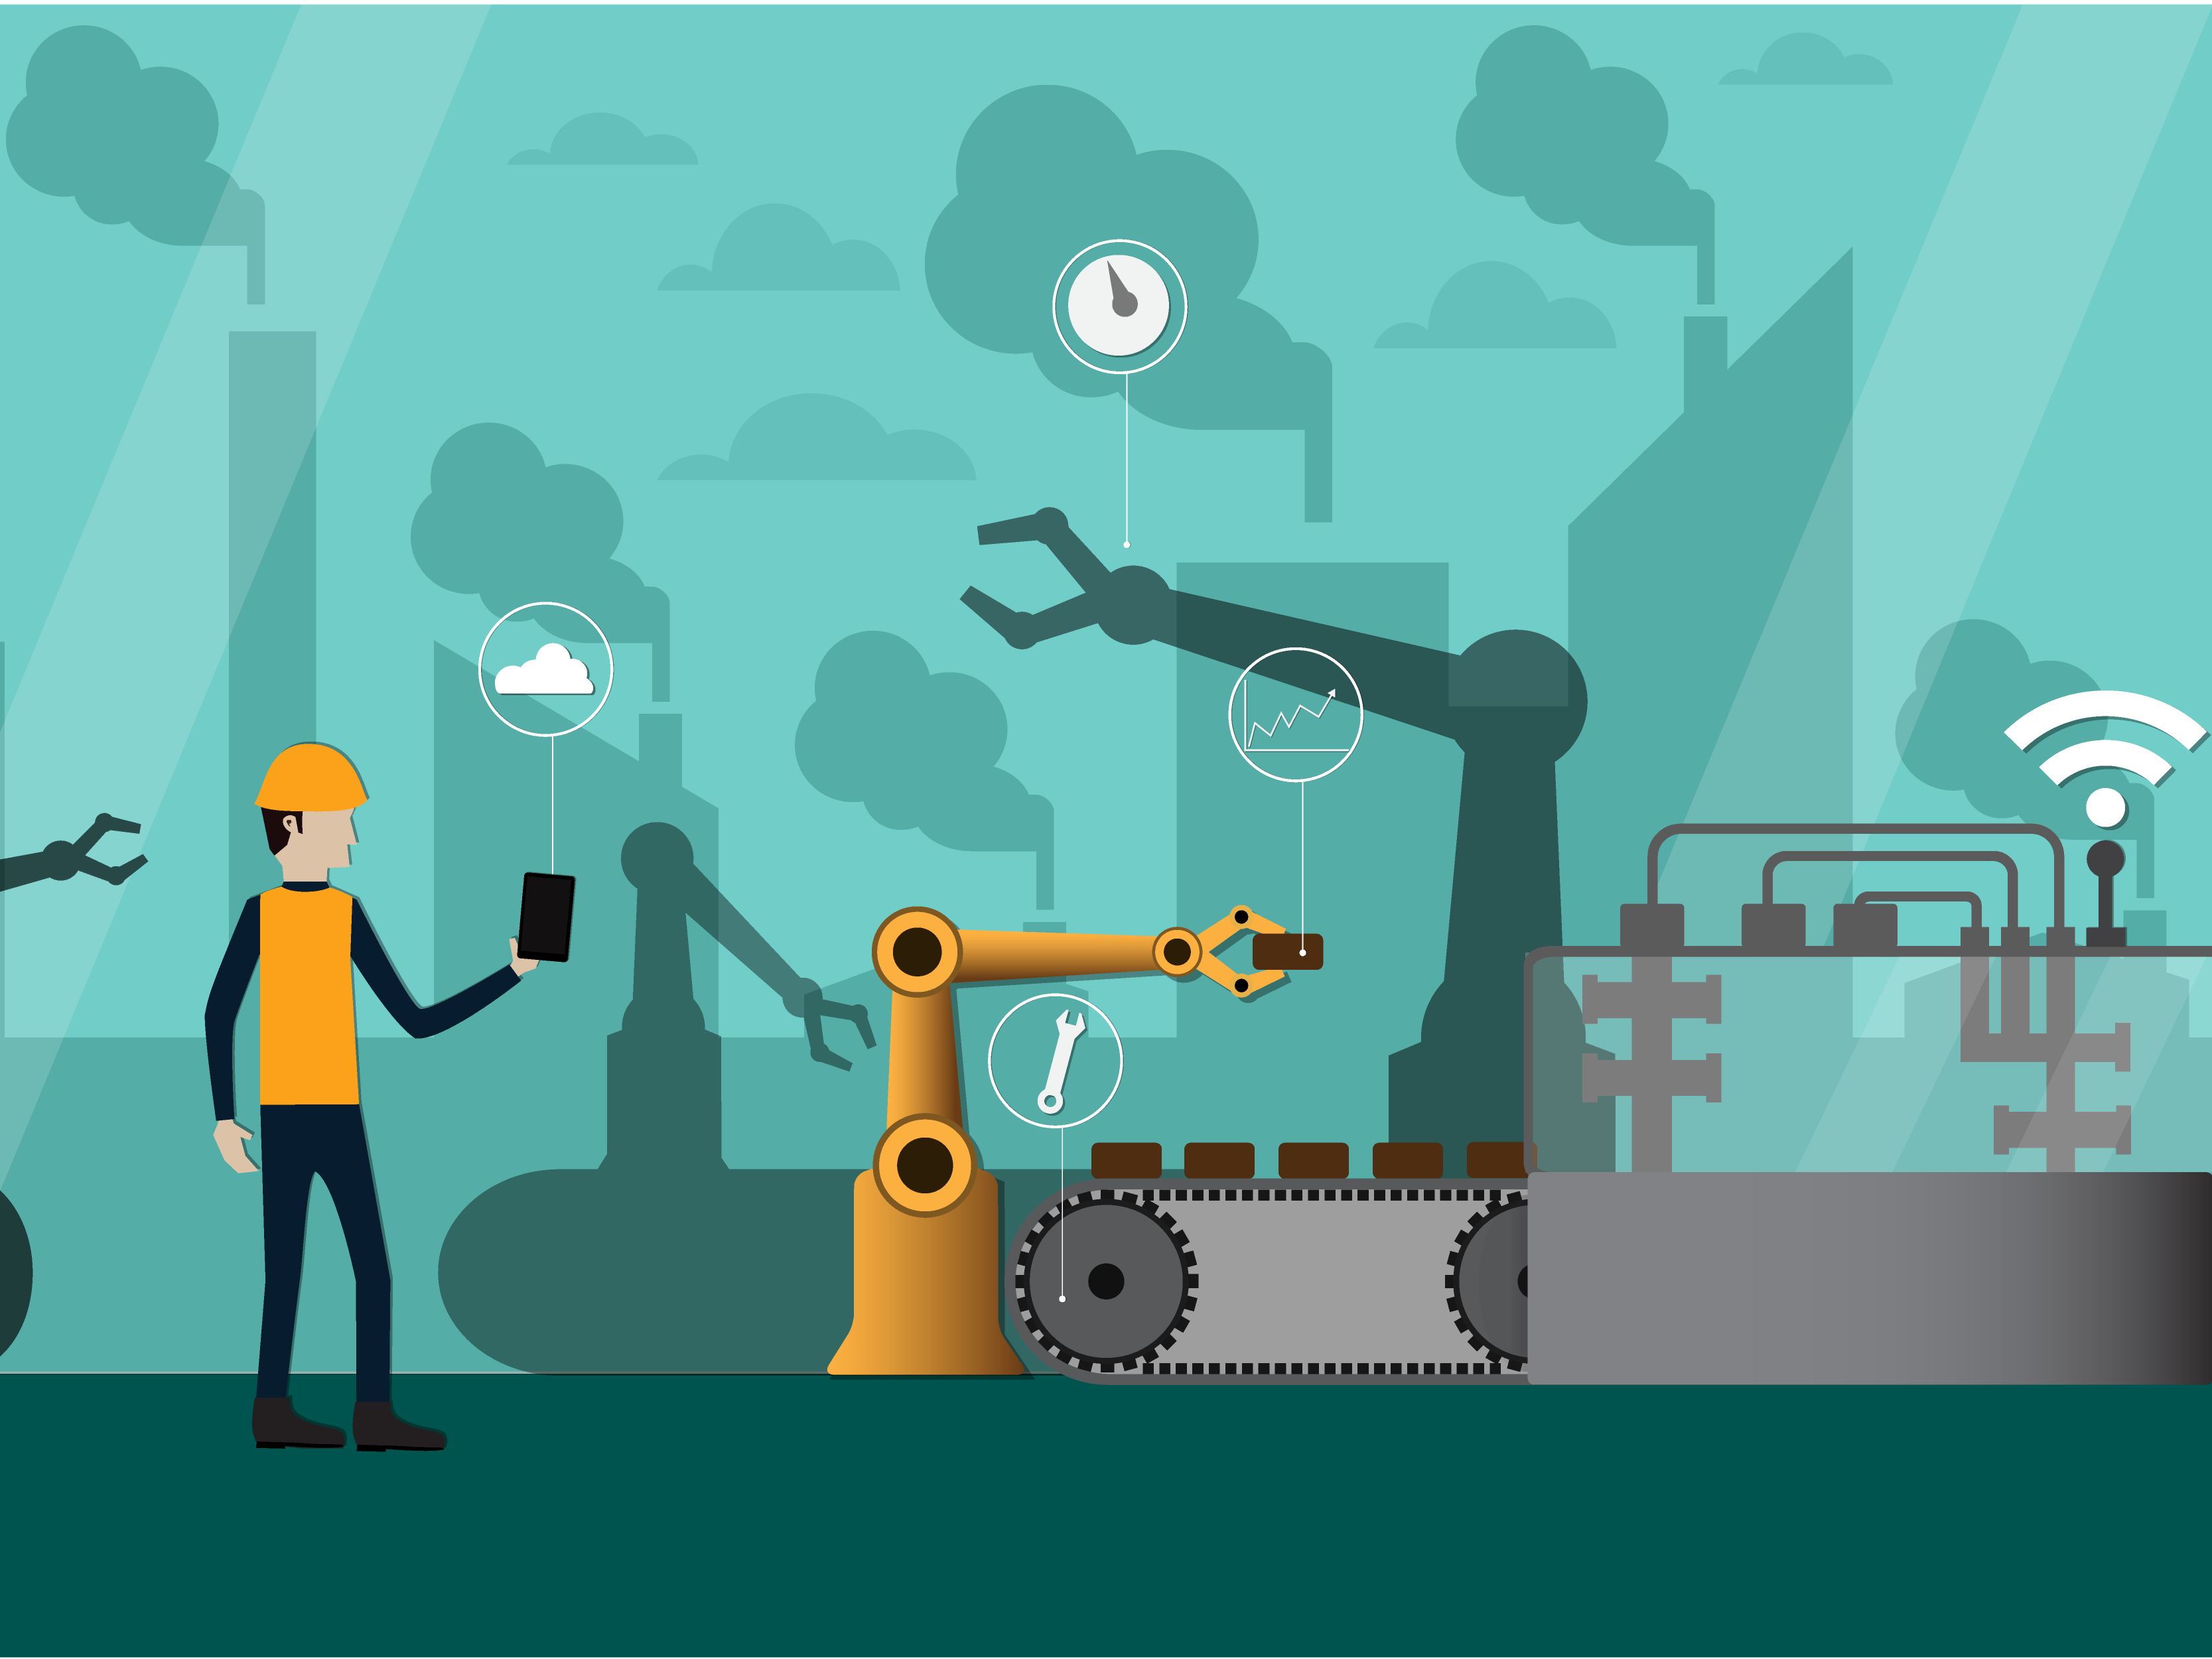 Benefits of IIoT in Manufacturing as well as Beyond